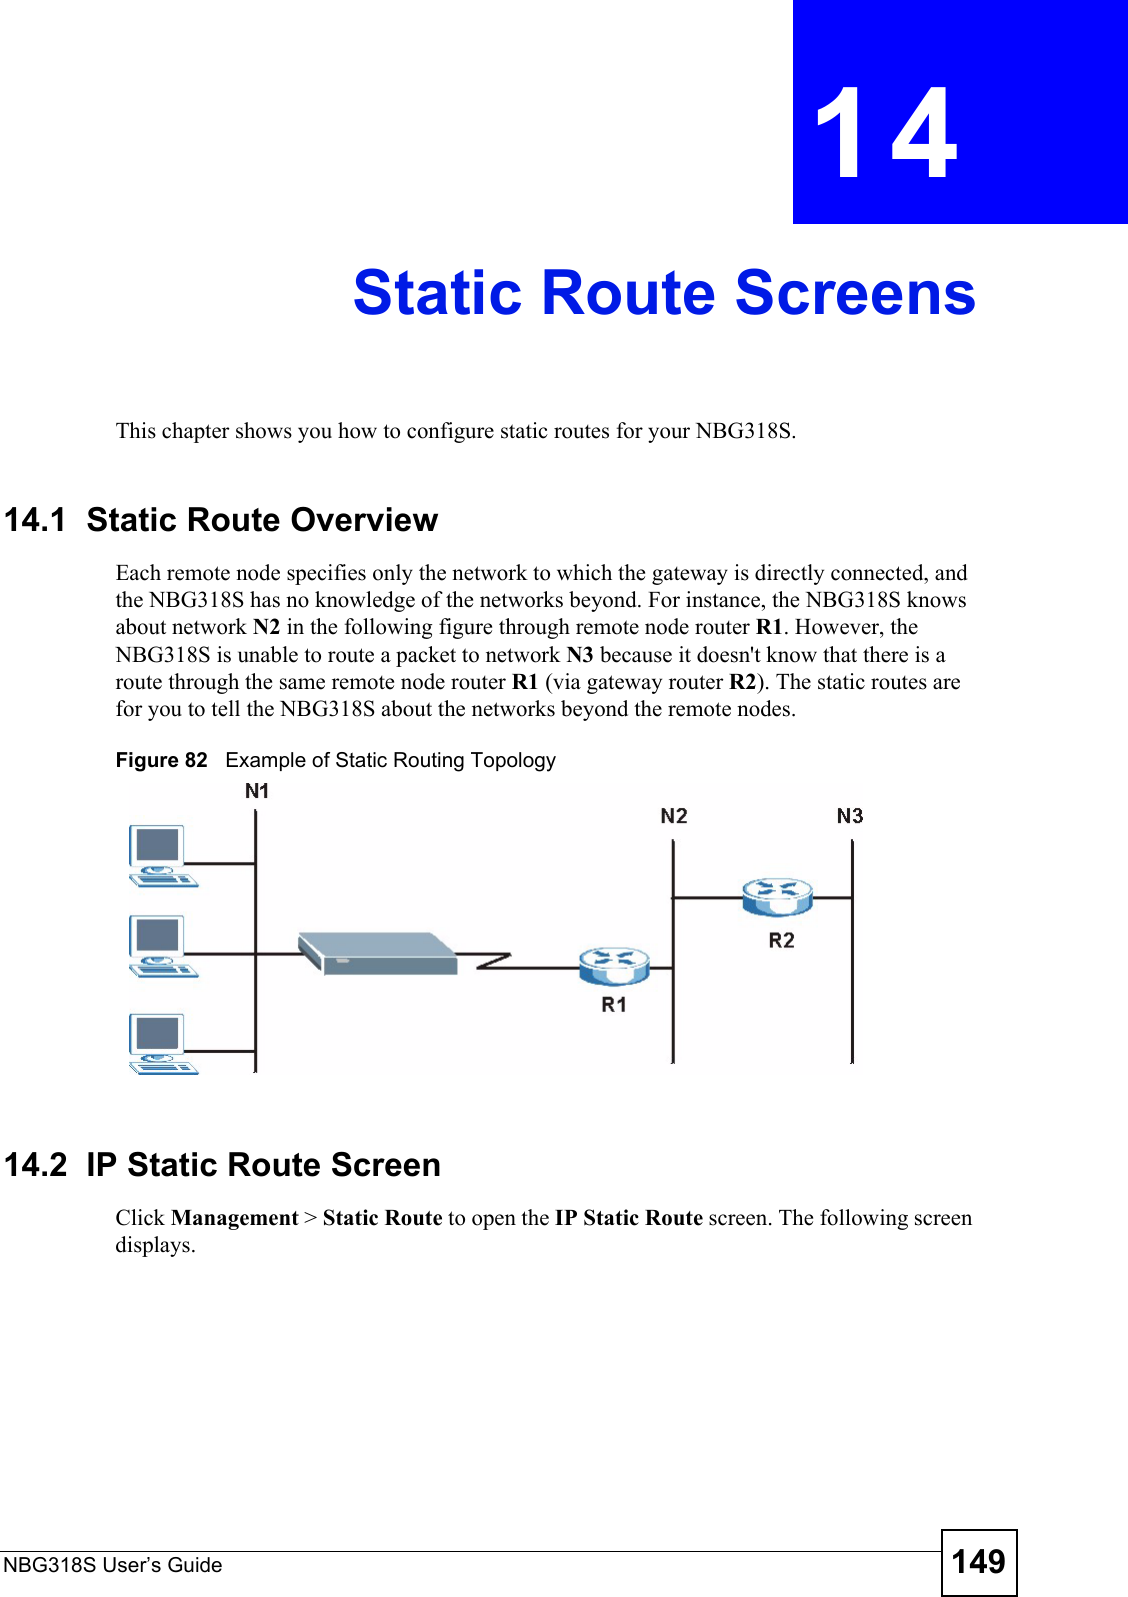 NBG318S User’s Guide 149CHAPTER  14 Static Route ScreensThis chapter shows you how to configure static routes for your NBG318S.14.1  Static Route OverviewEach remote node specifies only the network to which the gateway is directly connected, and the NBG318S has no knowledge of the networks beyond. For instance, the NBG318S knows about network N2 in the following figure through remote node router R1. However, the NBG318S is unable to route a packet to network N3 because it doesn&apos;t know that there is a route through the same remote node router R1 (via gateway router R2). The static routes are for you to tell the NBG318S about the networks beyond the remote nodes.Figure 82   Example of Static Routing Topology14.2  IP Static Route ScreenClick Management &gt; Static Route to open the IP Static Route screen. The following screen displays.